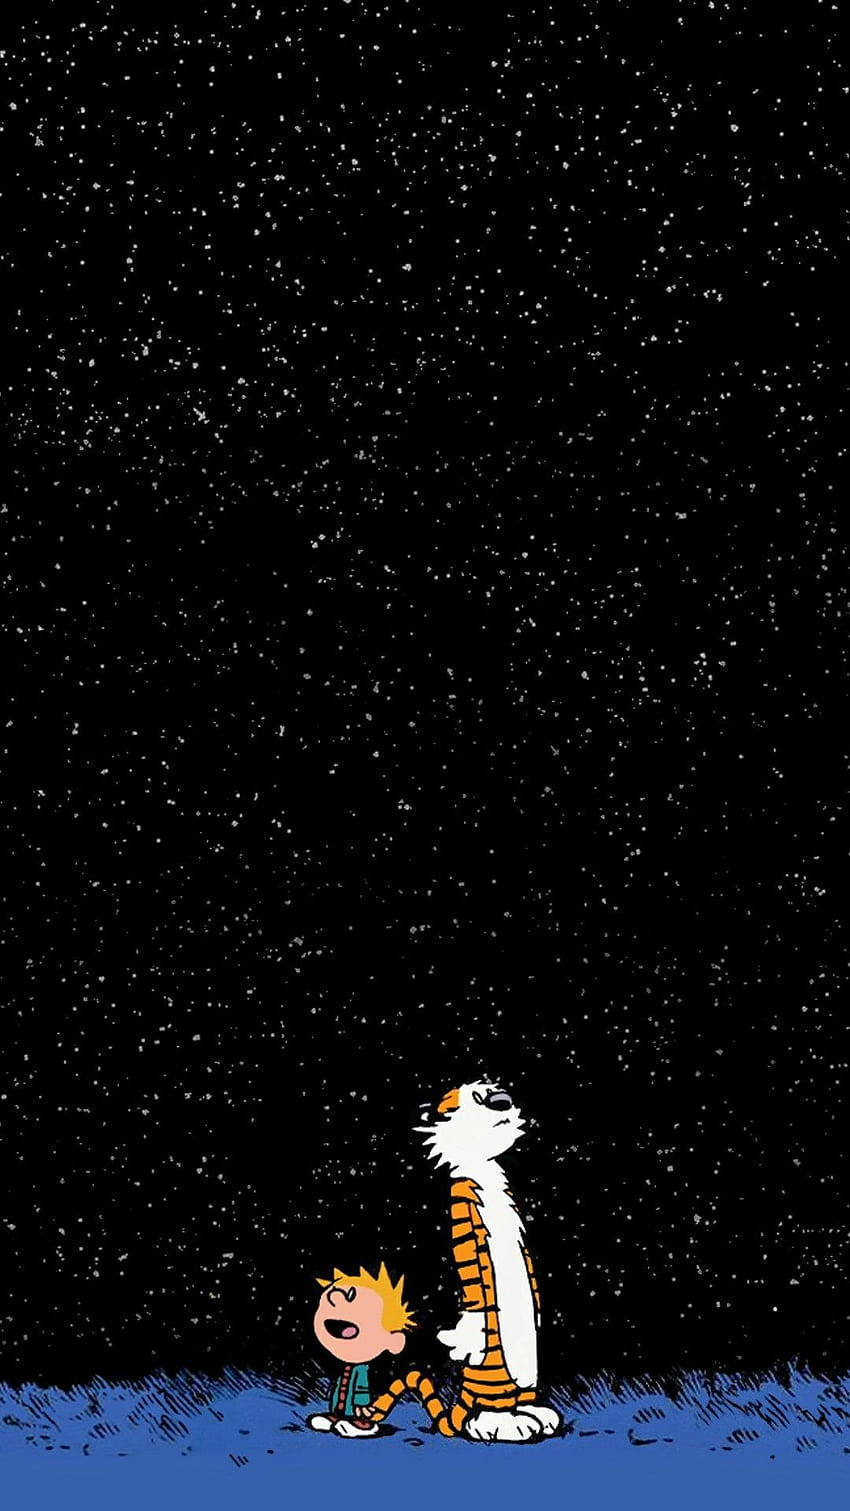 Request] Can anyone turn this Calvin and hobbes into an, amoled stars HD phone wallpaper